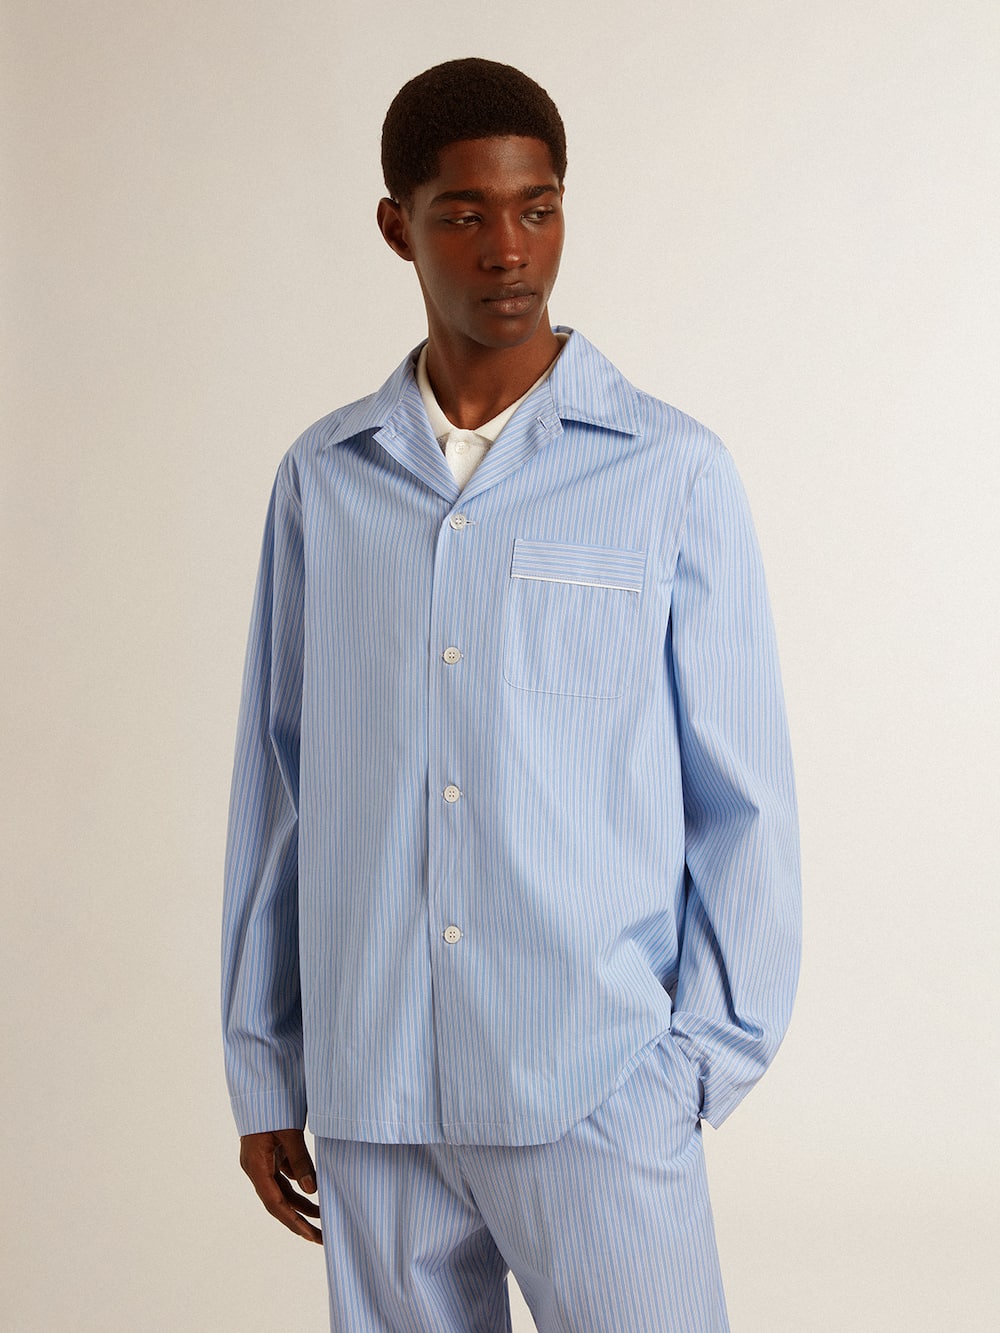 Golden Goose - Men's shirt in white and blue striped cotton poplin in 